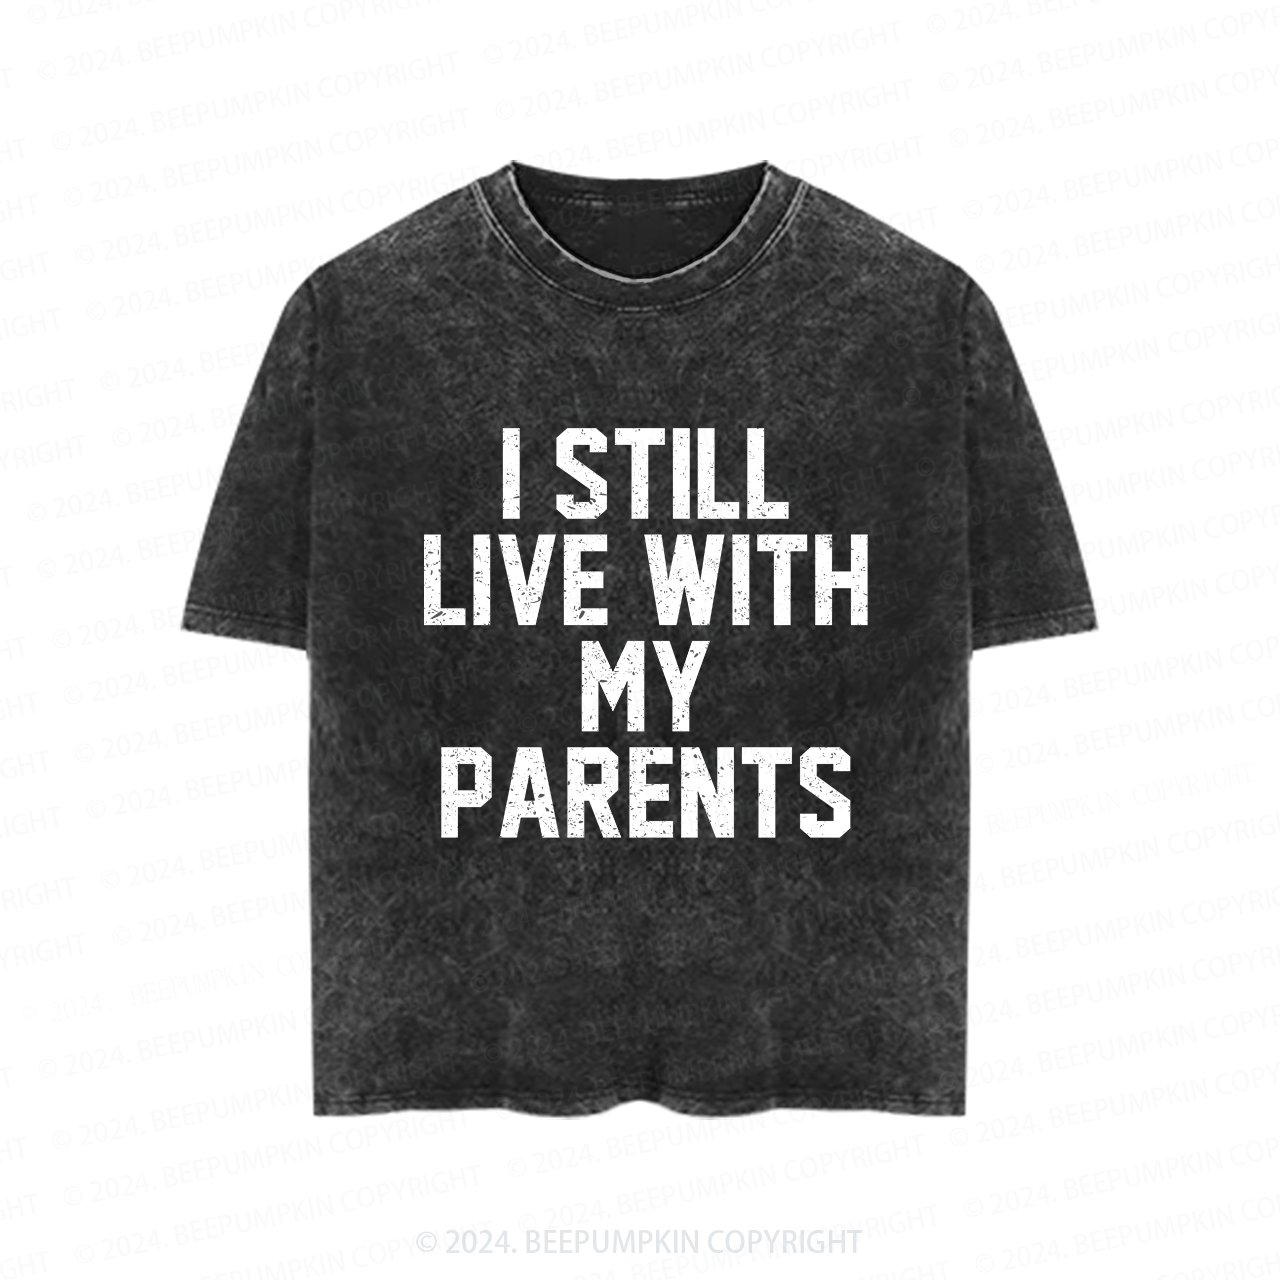 I Still Live With My Parents Toddler&Kids Washed Tees        